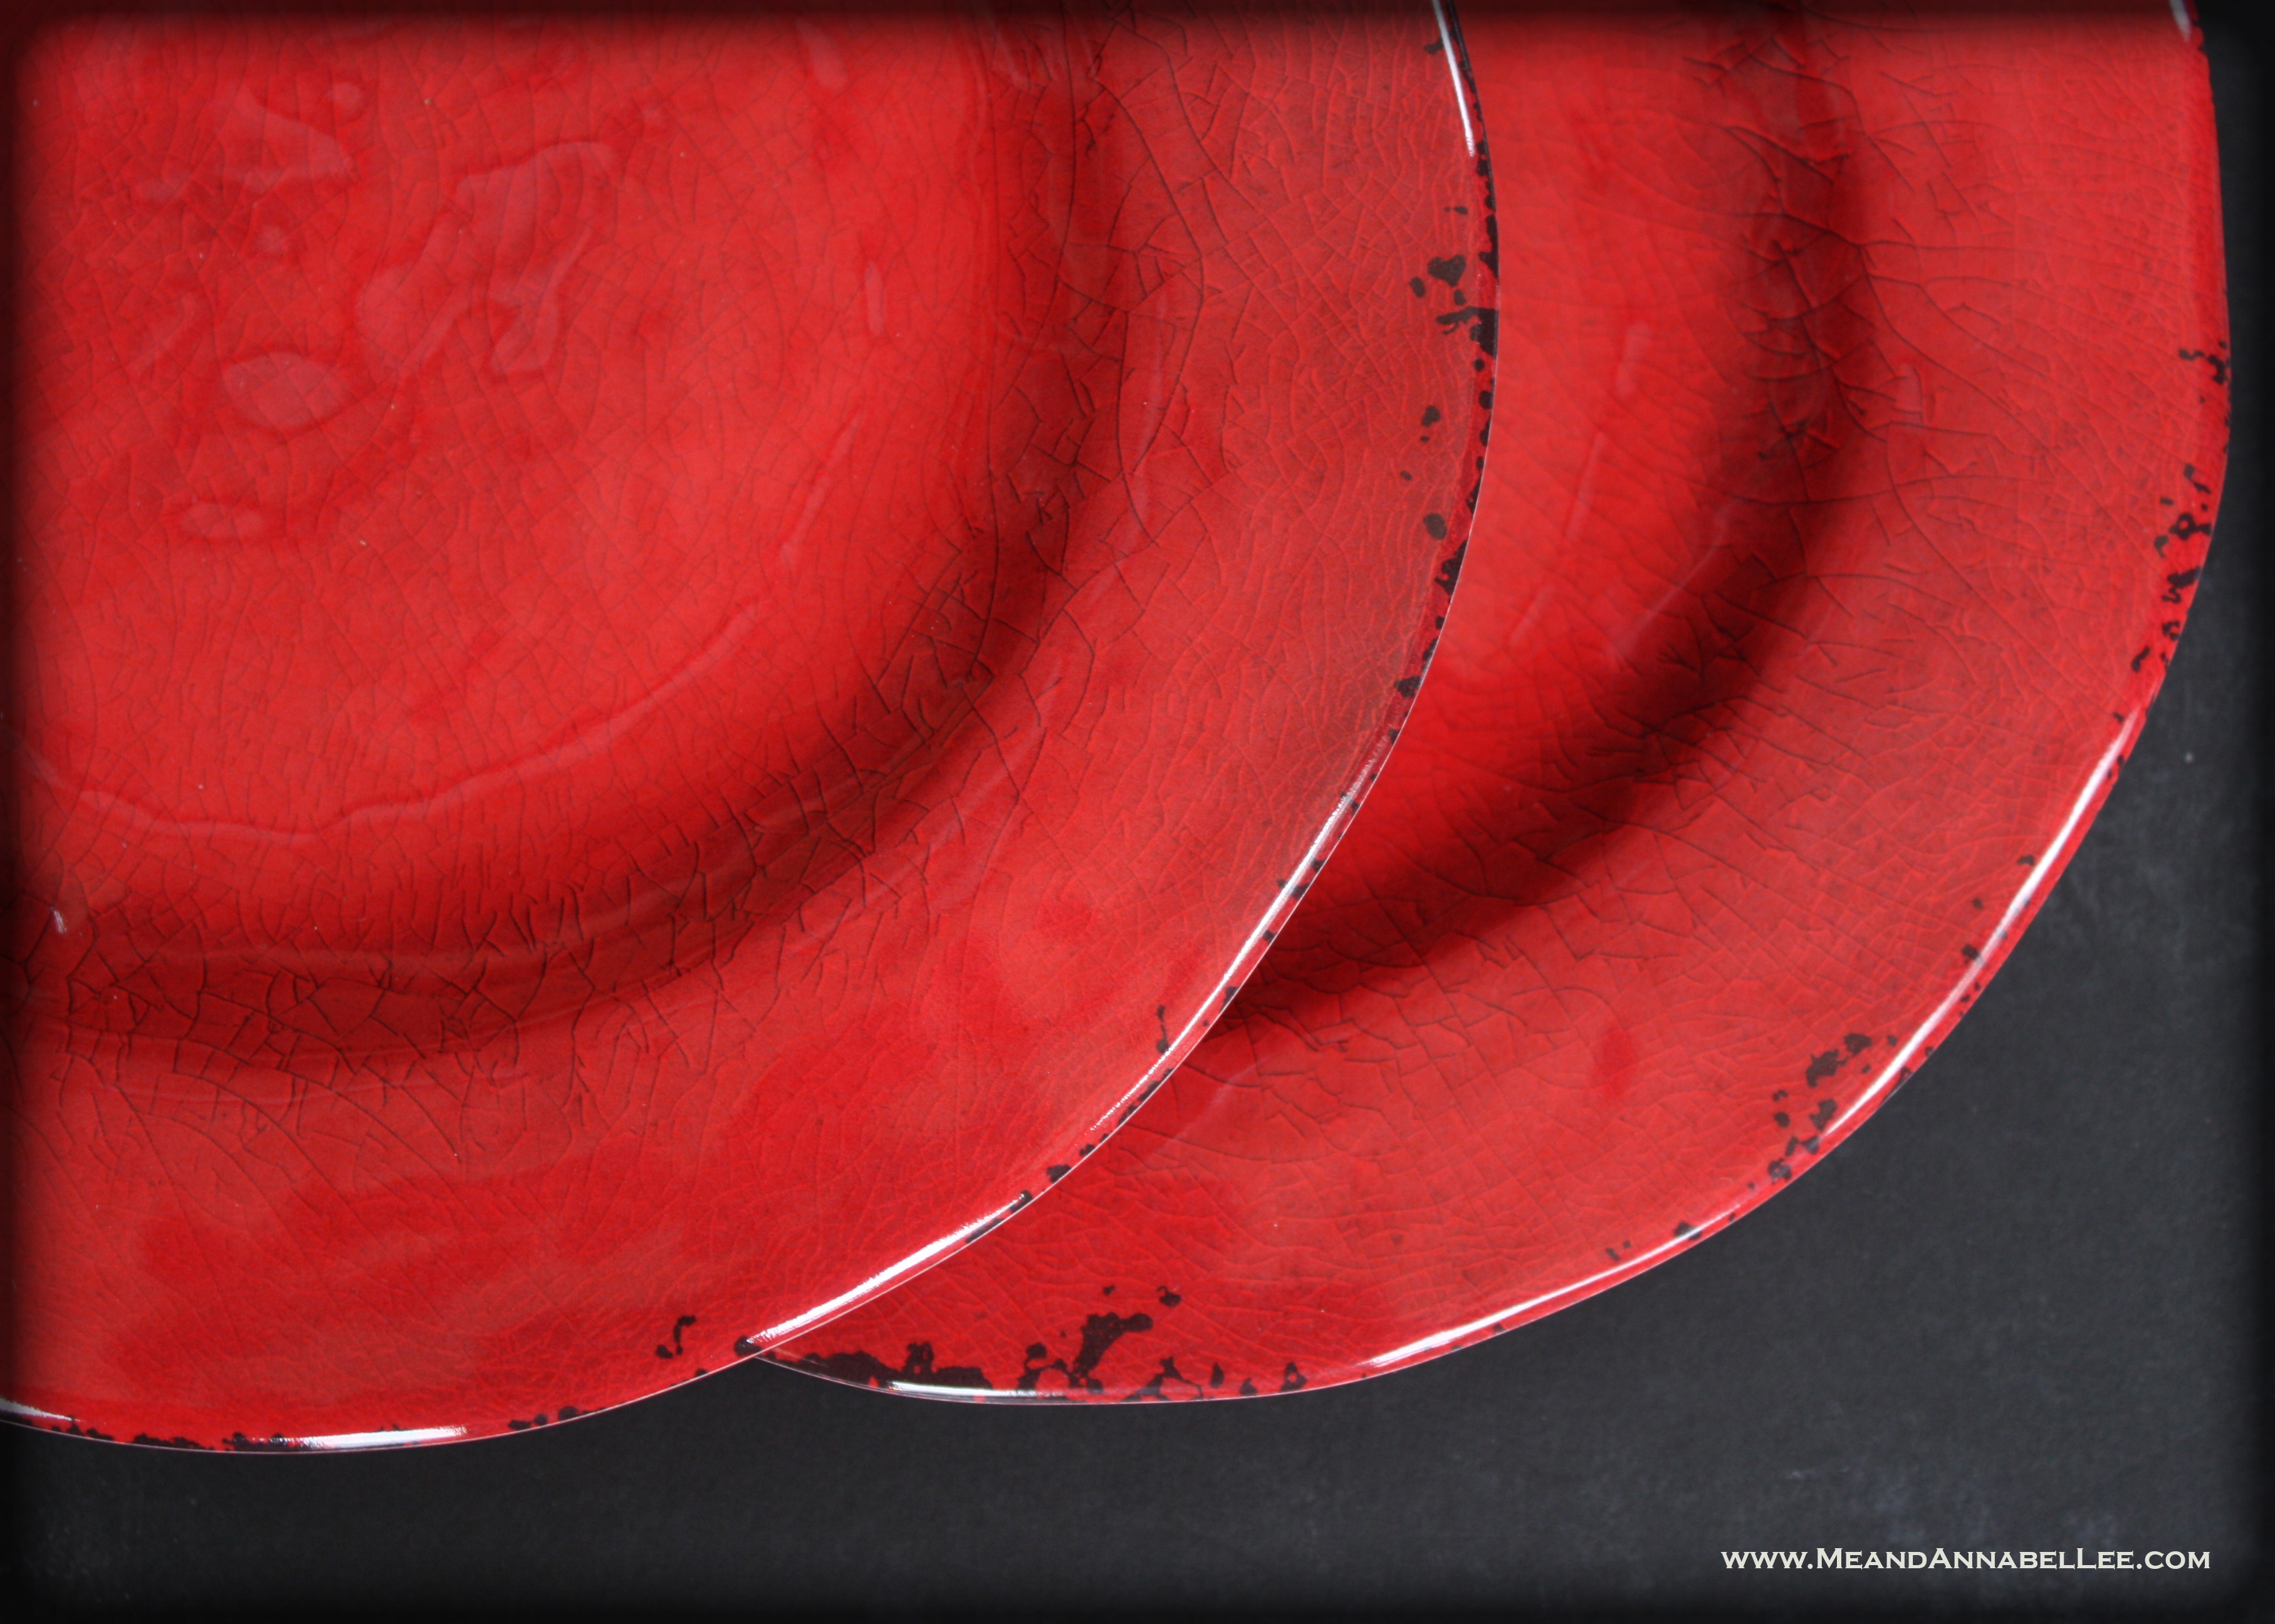 Transform Red Christmas plates into Gothic Red & Black Plate Stands | www.MeandAnnabelLee.com